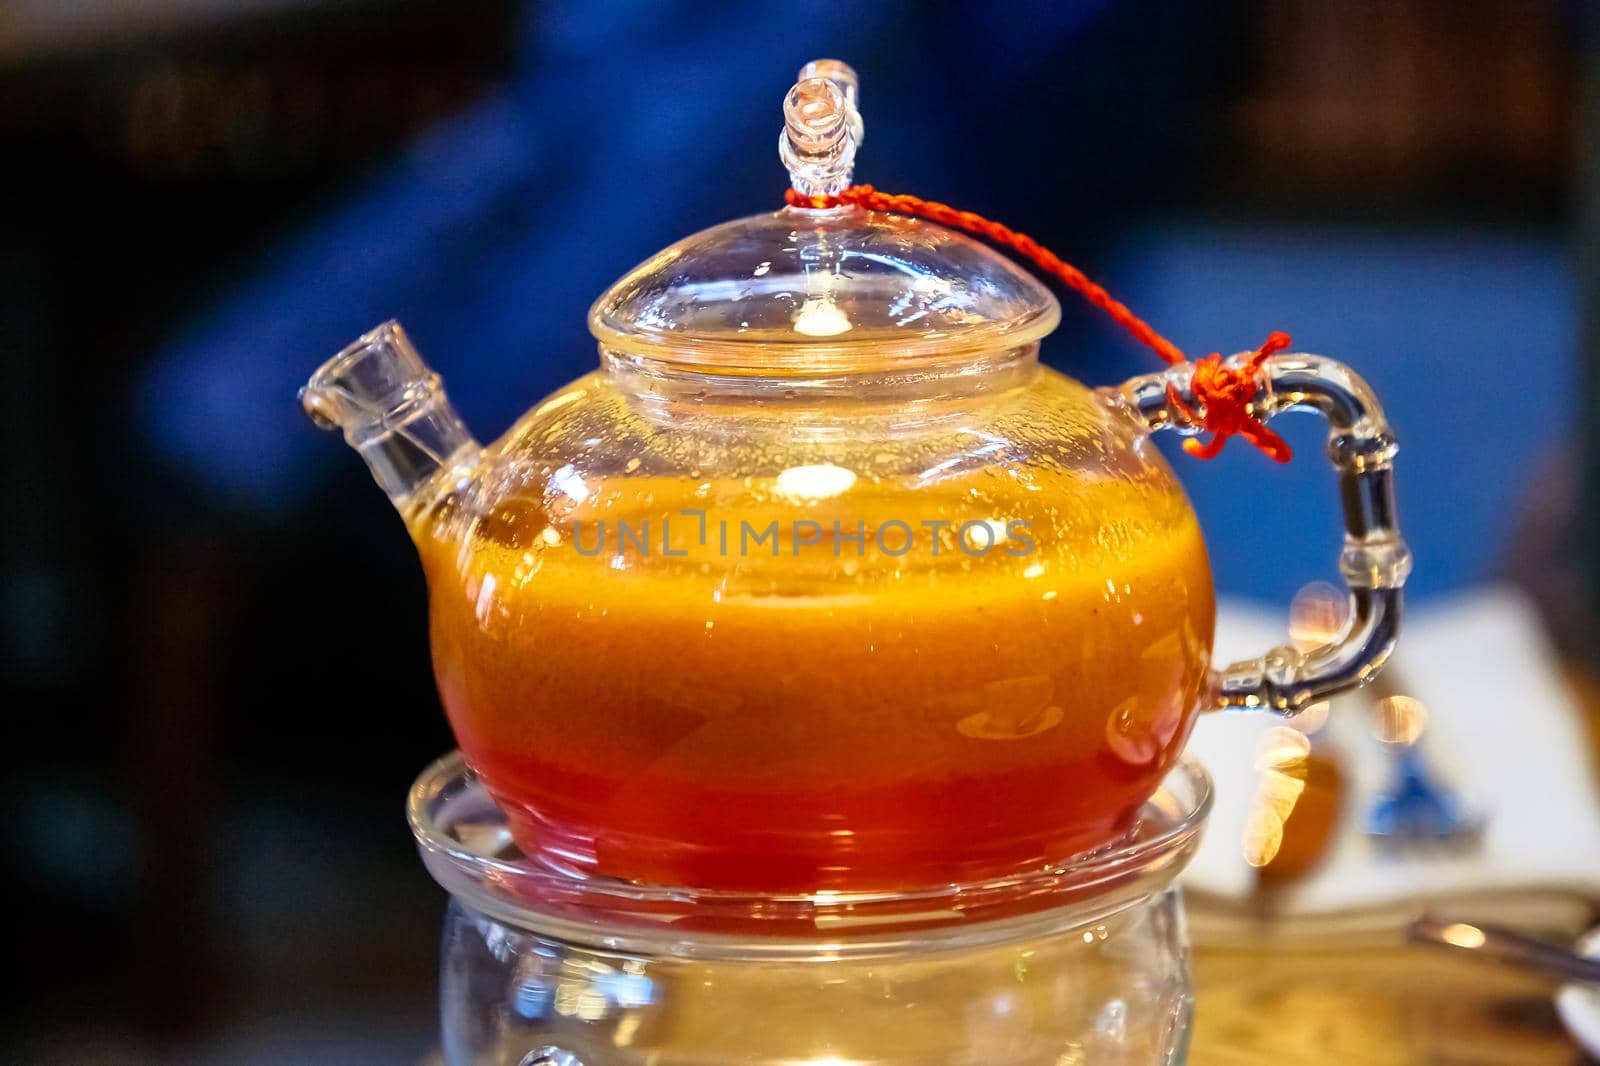 Red tea with sea buckthorn in a glass teapot. by Milanchikov